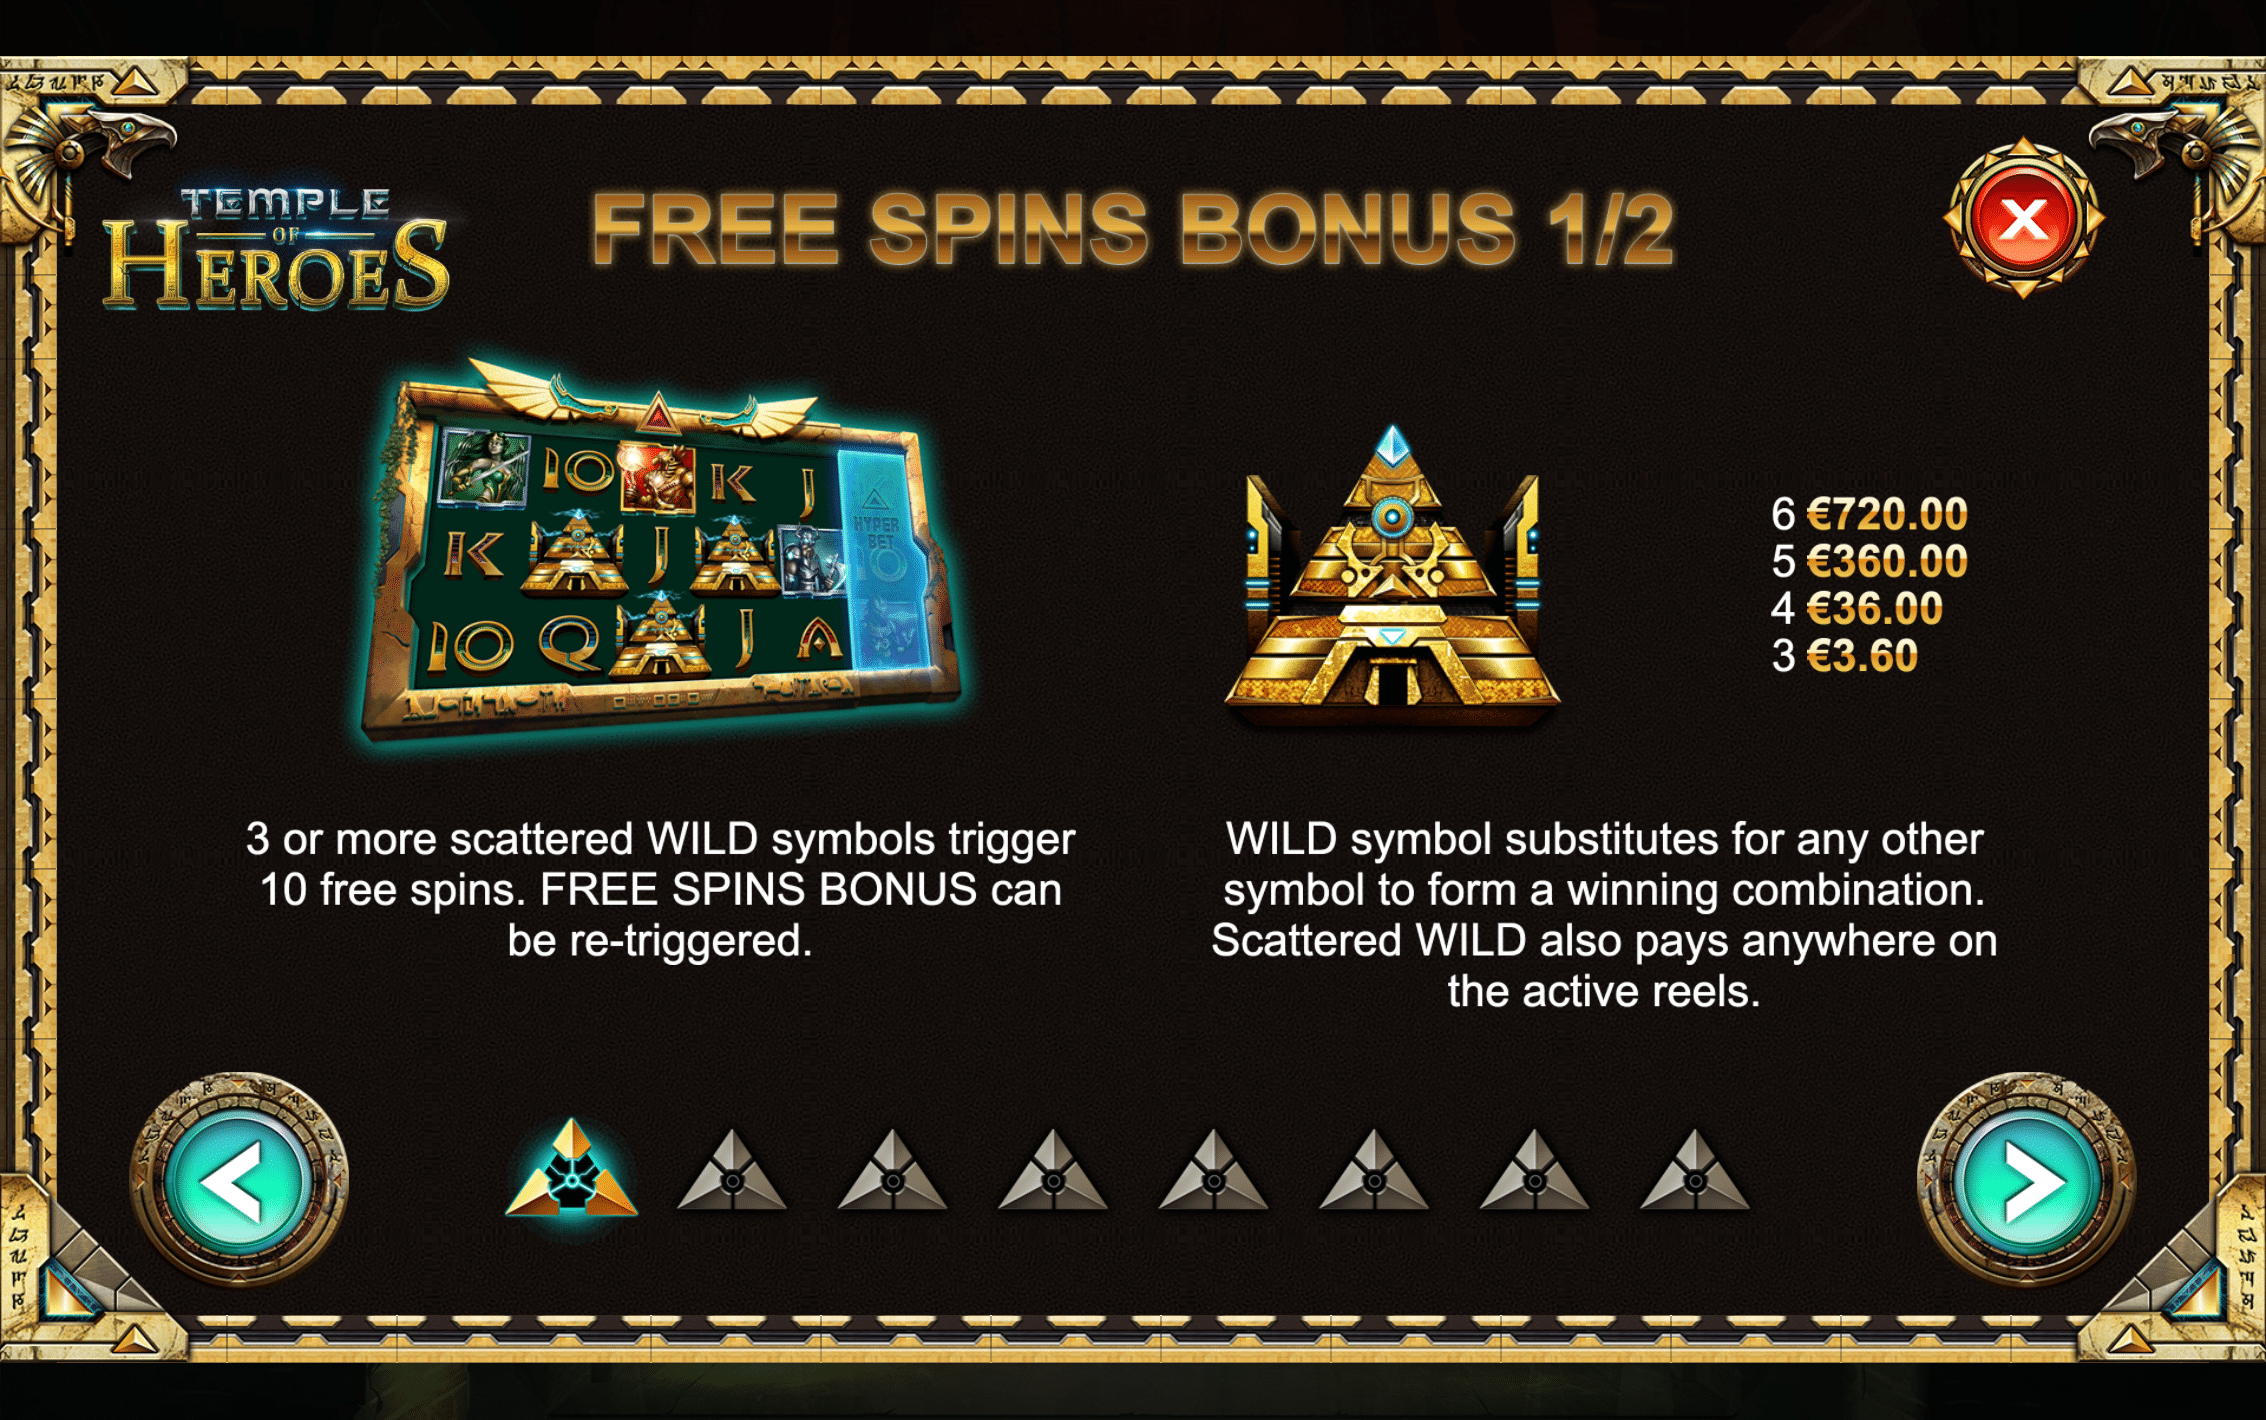 Temple of Heroes free spins